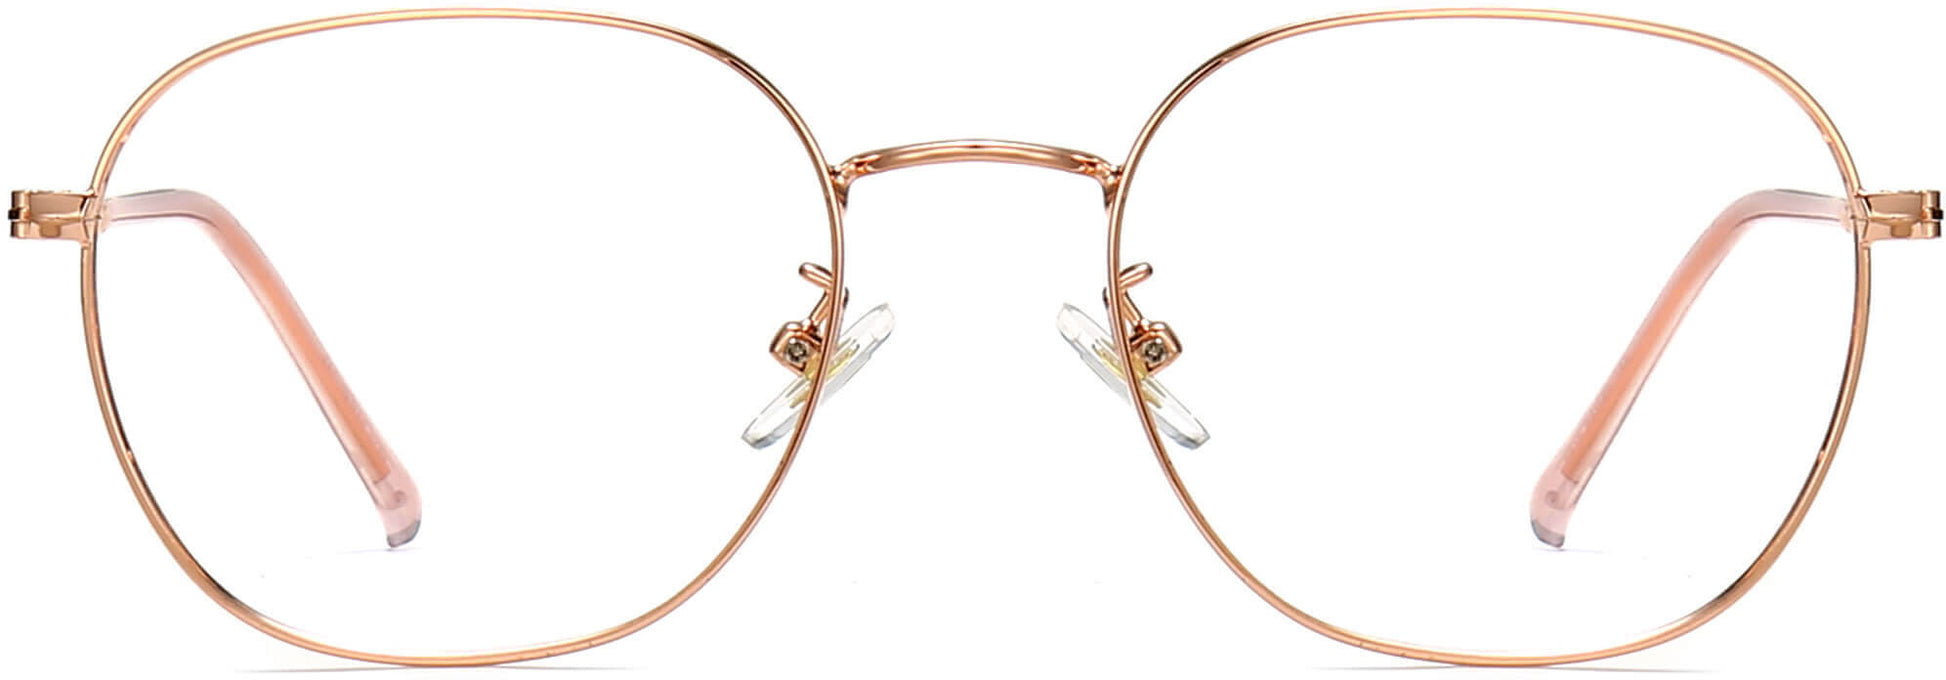 Harper Round Rose Gold Eyeglasses from ANRRI, front view